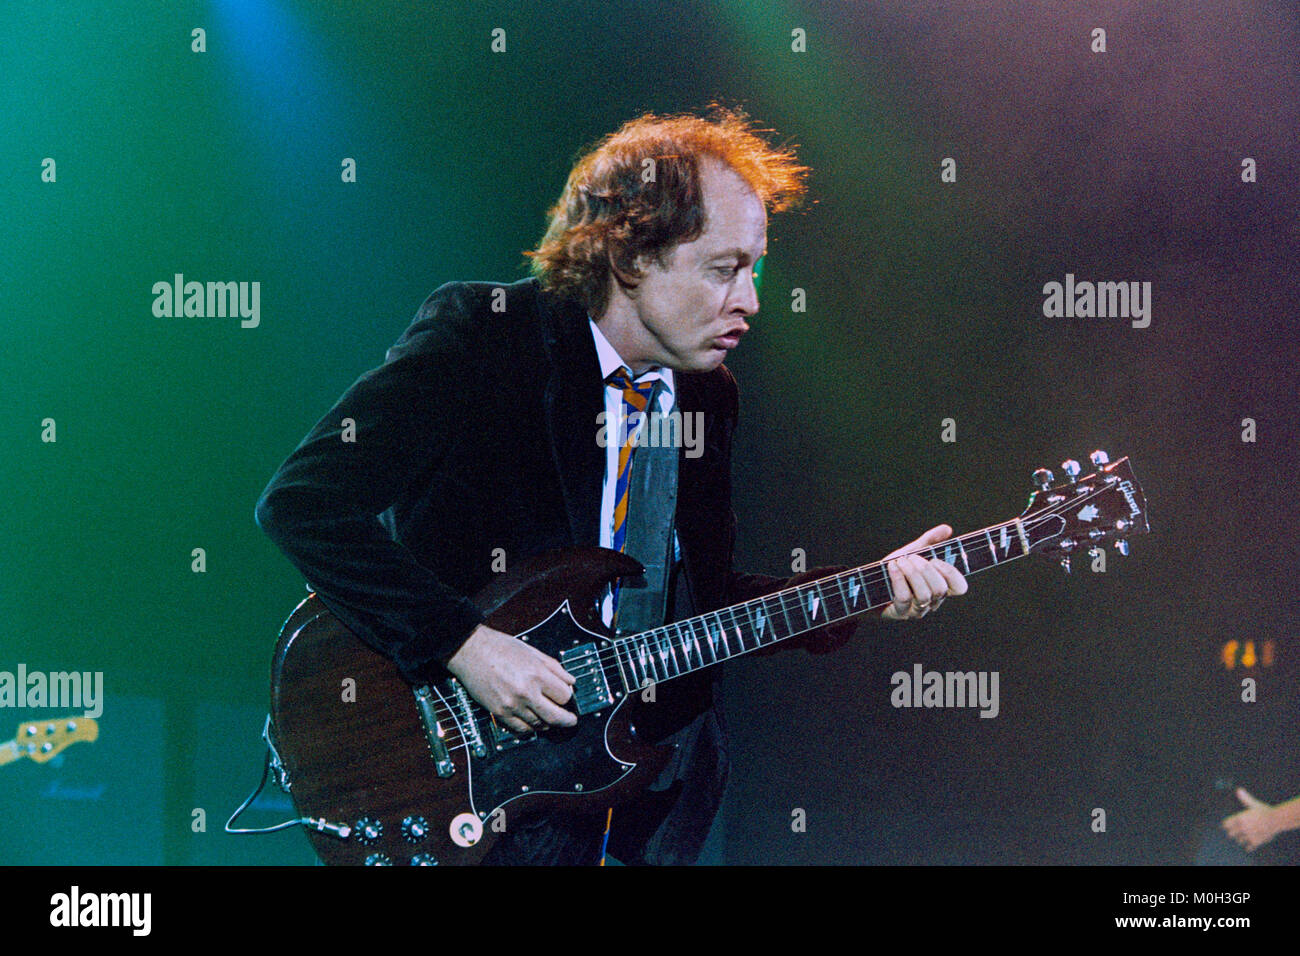 Angus Young of Australian Rock group AC/DC performing at the Hammersmith Apollo. 21st October 2003, London, England, United Kingdom. Stock Photo